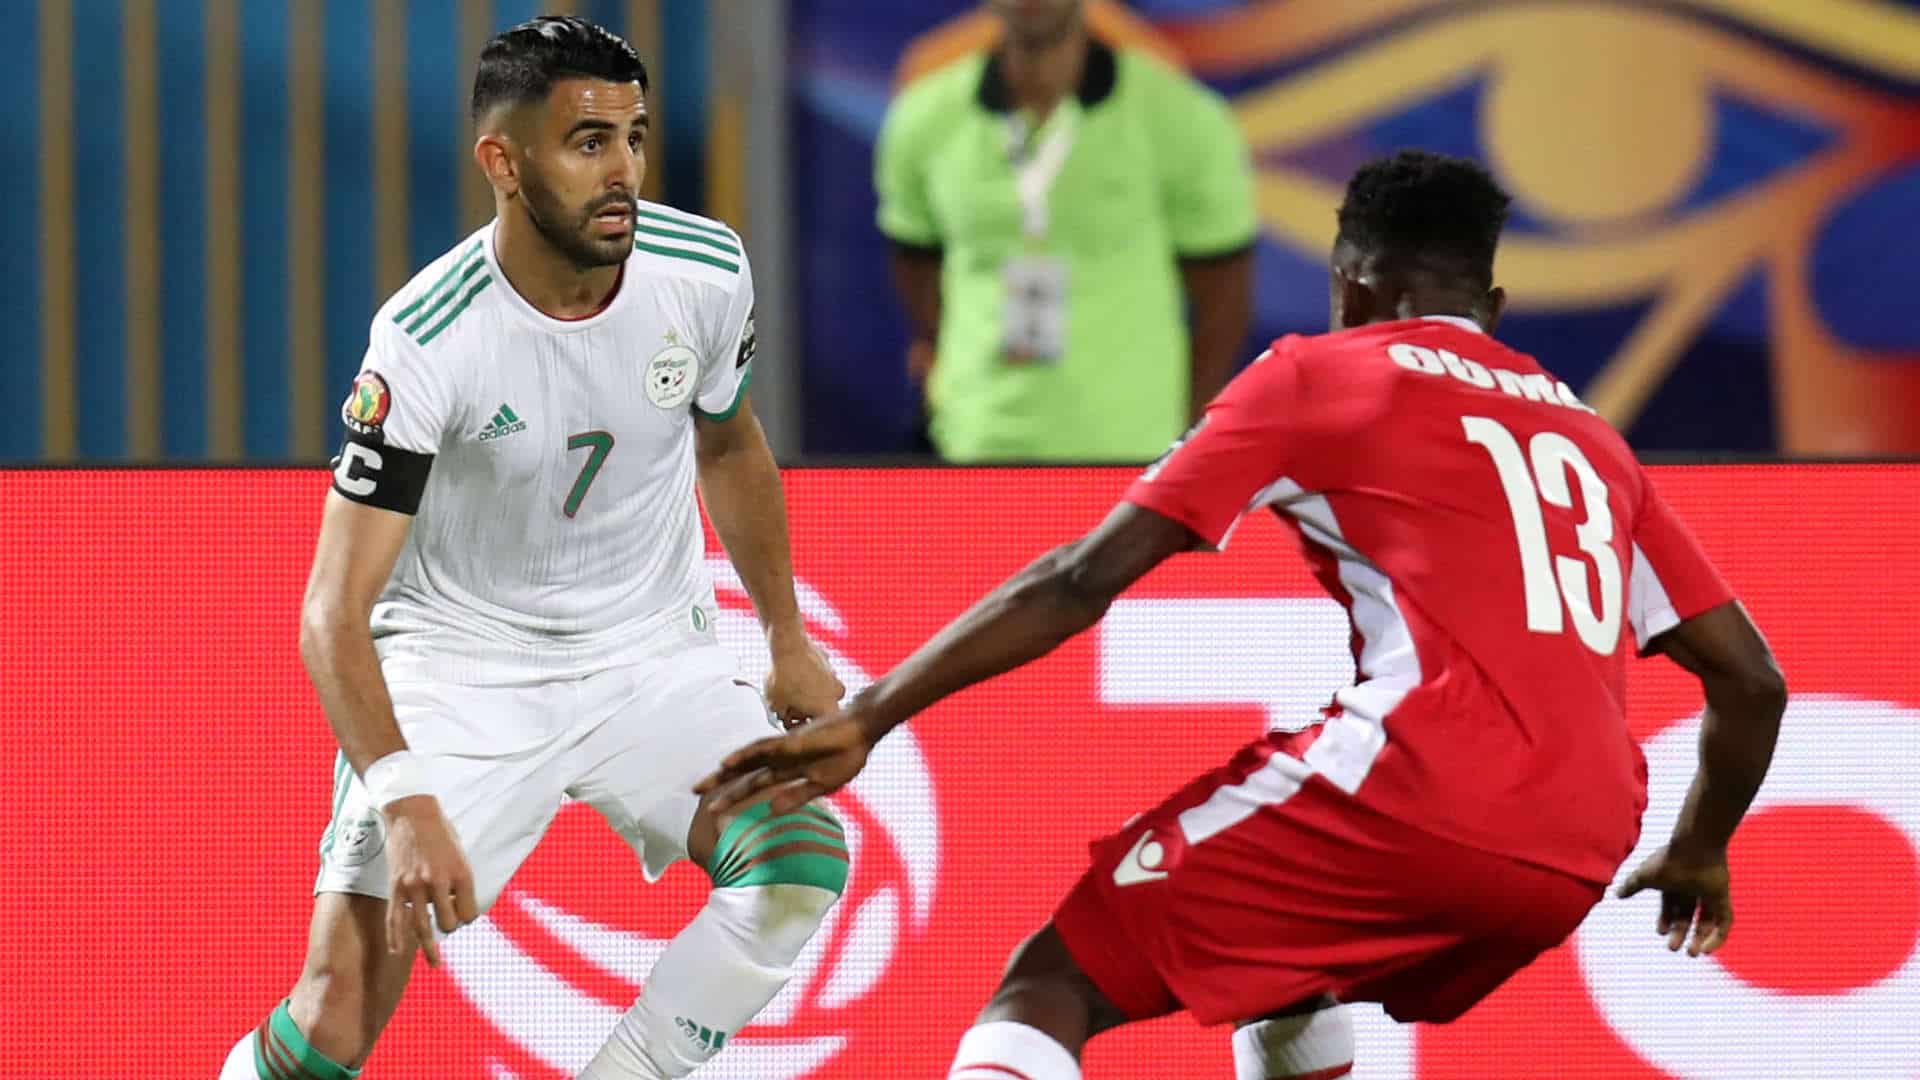 The second game of group C saw Algeria take on Kenya